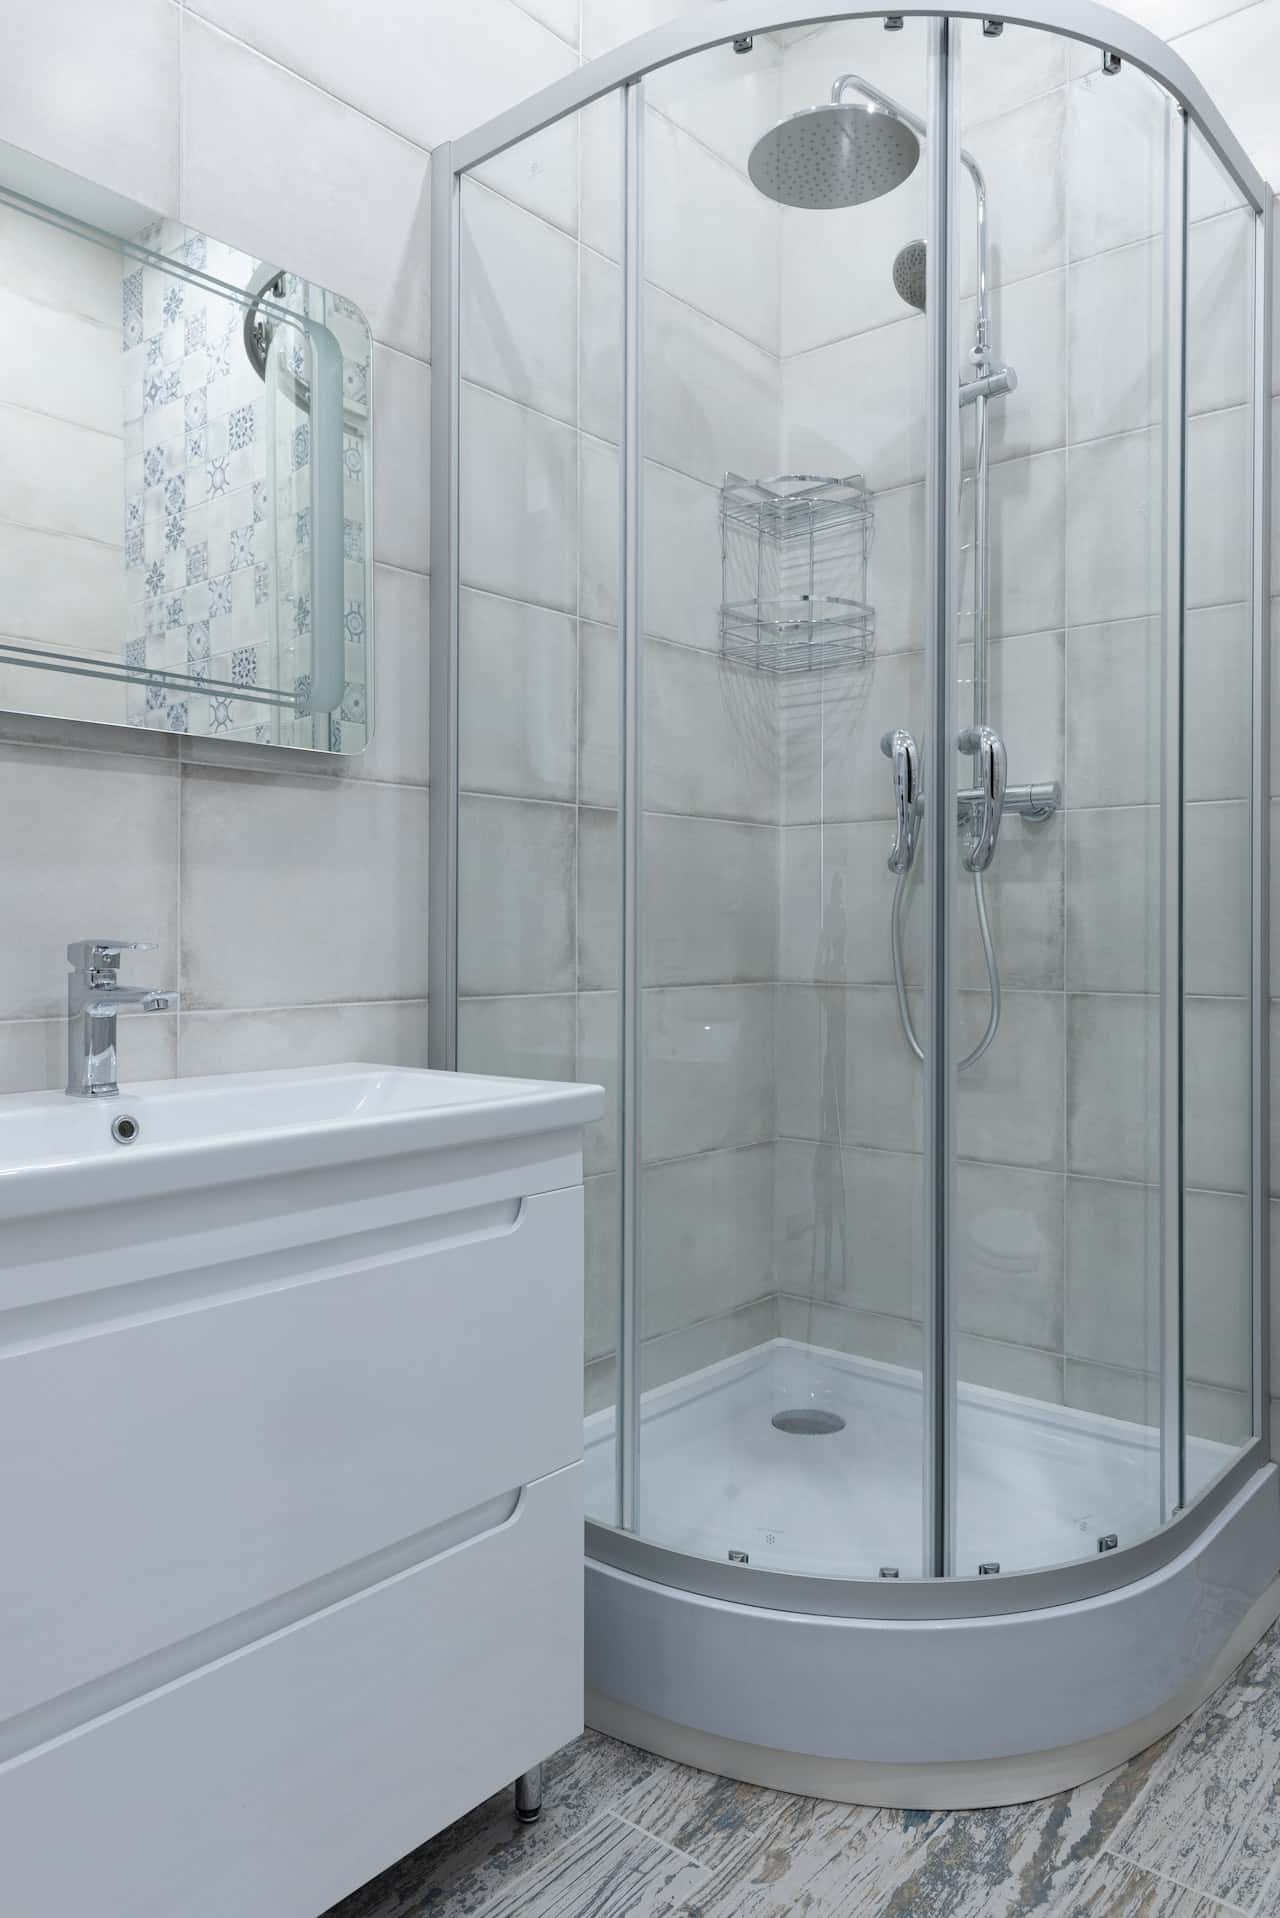 10 Different Types of Showers and How to Choose One